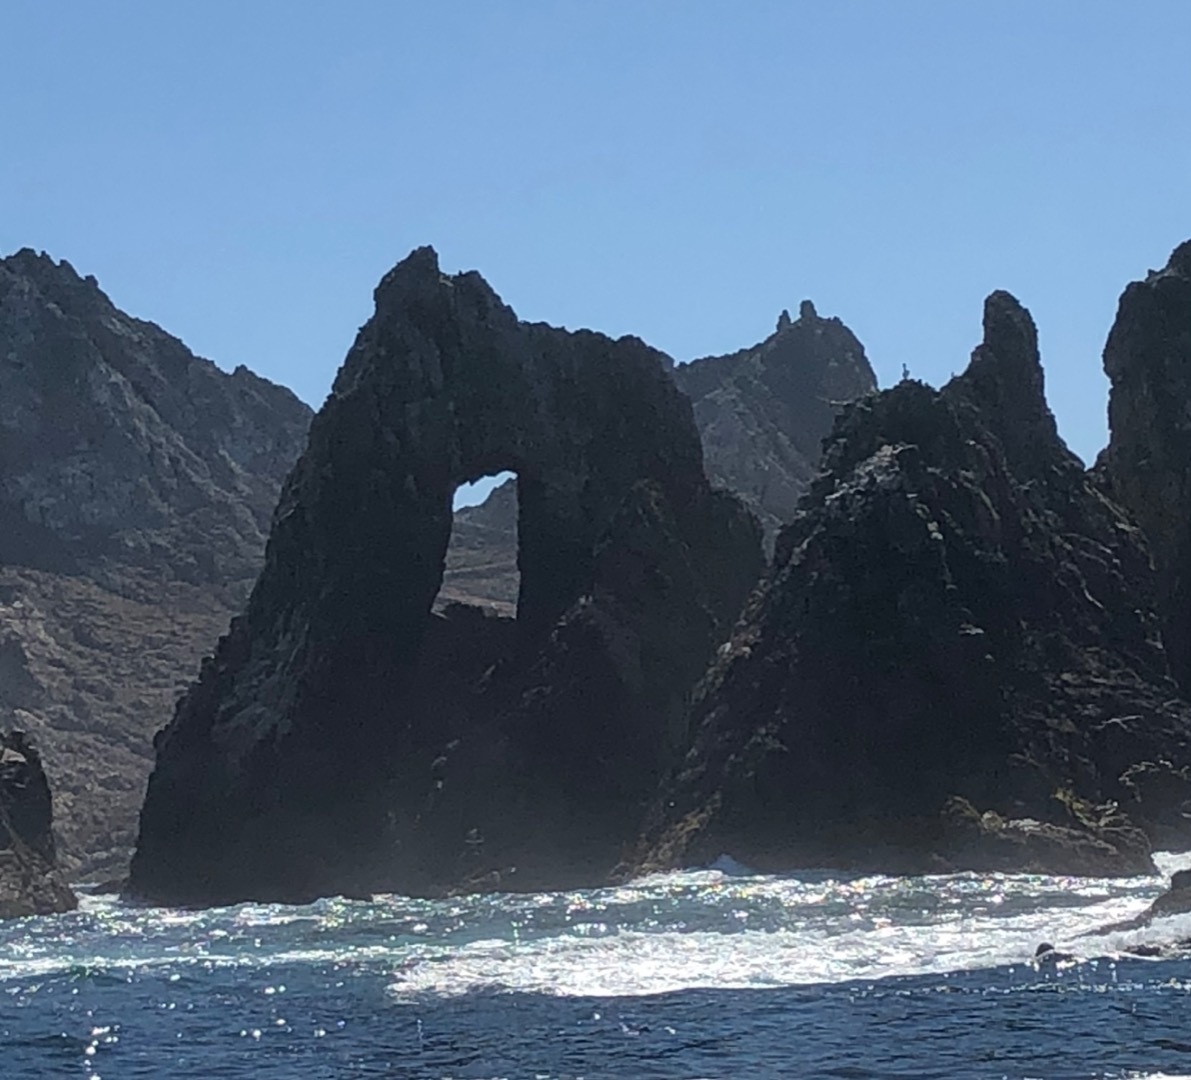 Farallon Islands, Rockfish, Lingcod, Whales & Dolphins… CRABS coming soon !! 😎🐟🐋🐬🎣👍.   🦀🦀🦀